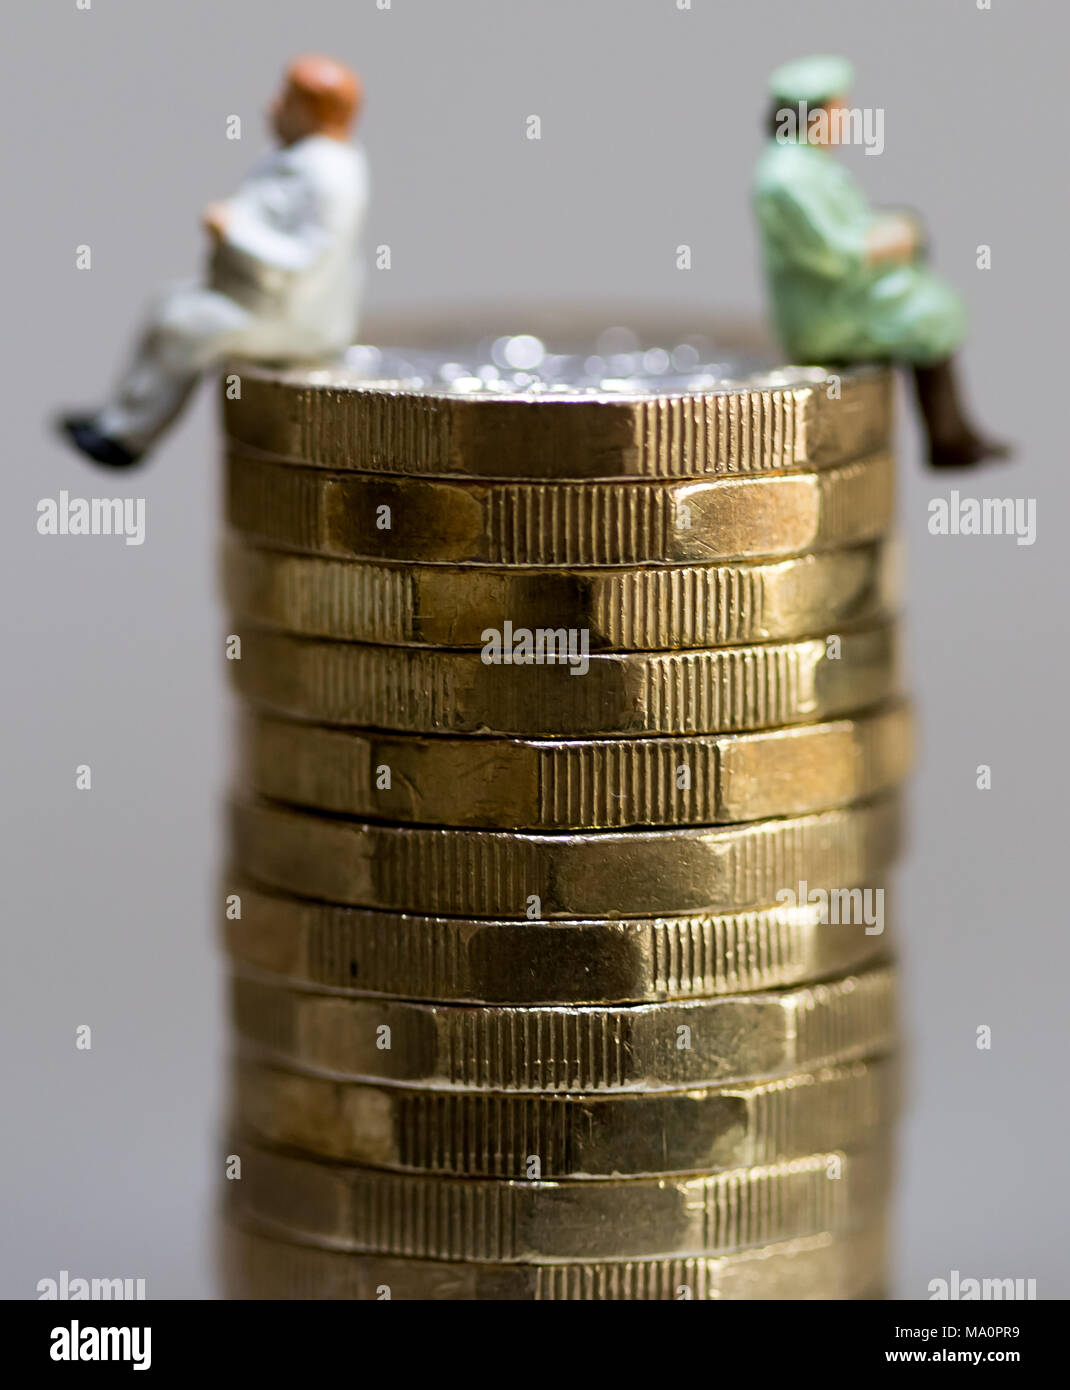 Gender pay equality concept image of man and woman on a stack of pound coins Stock Photo